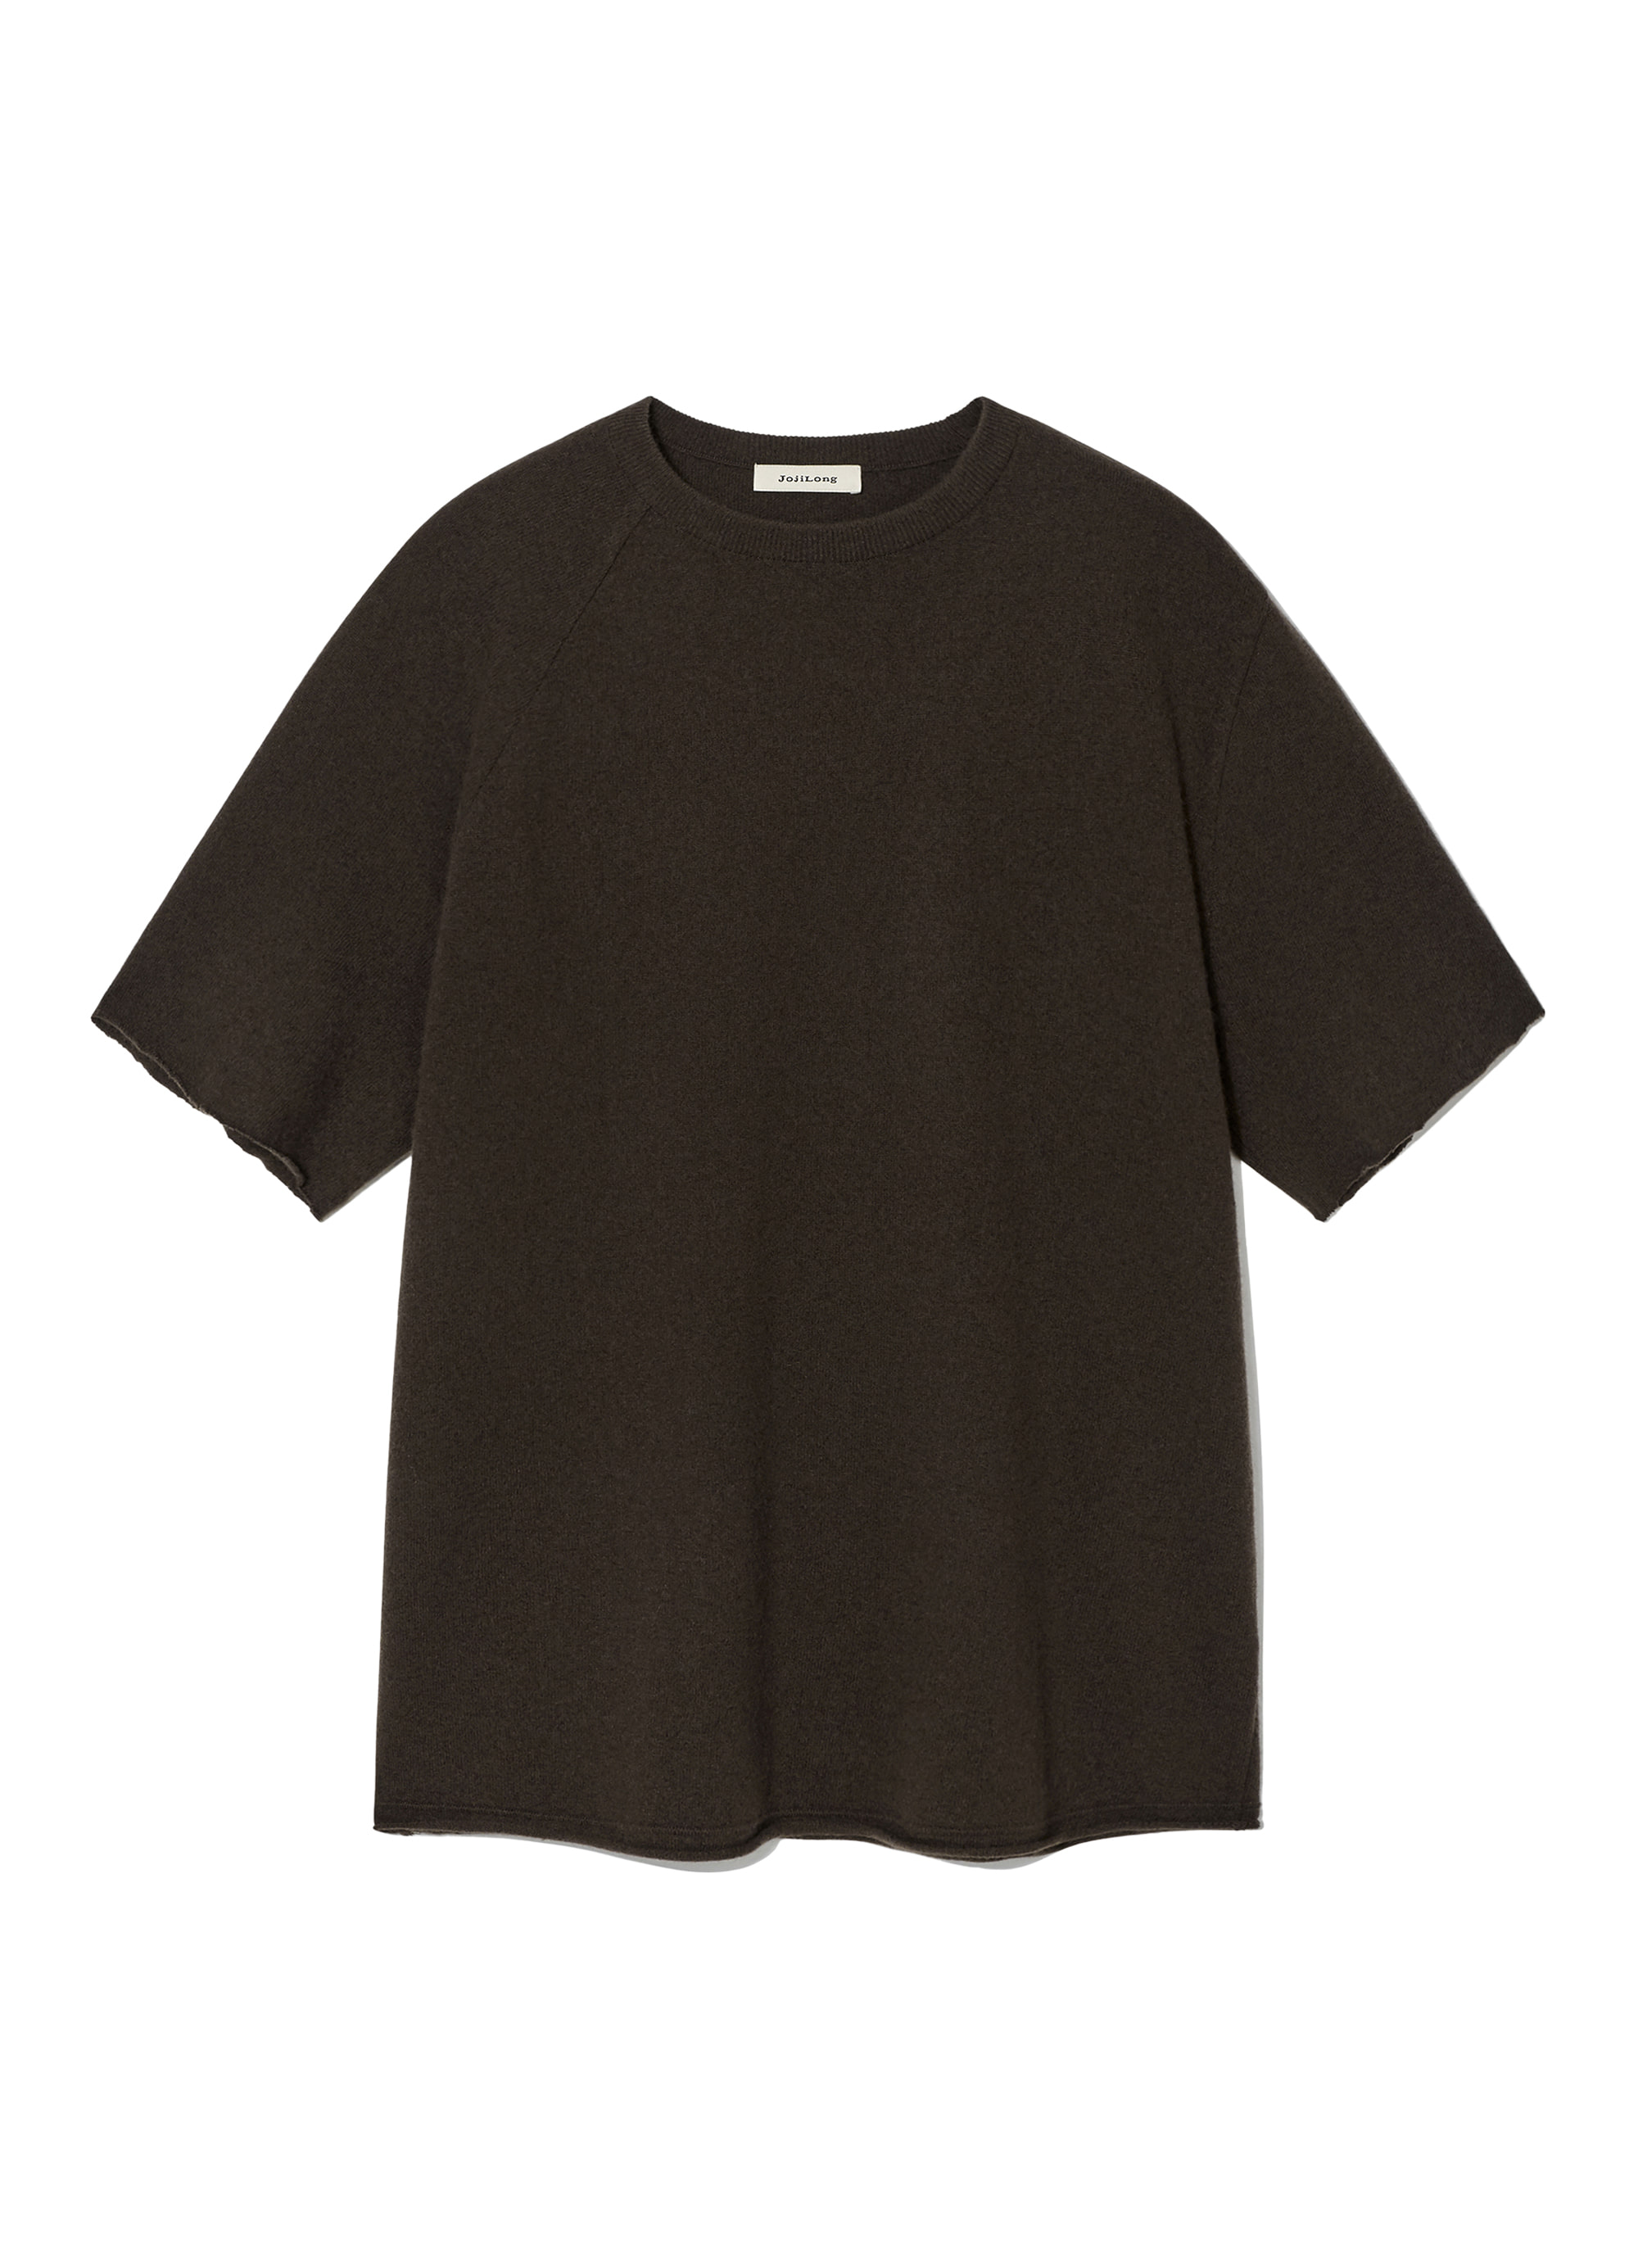 CASHMERE DISTRESSED SLEEVE KNIT BROWN